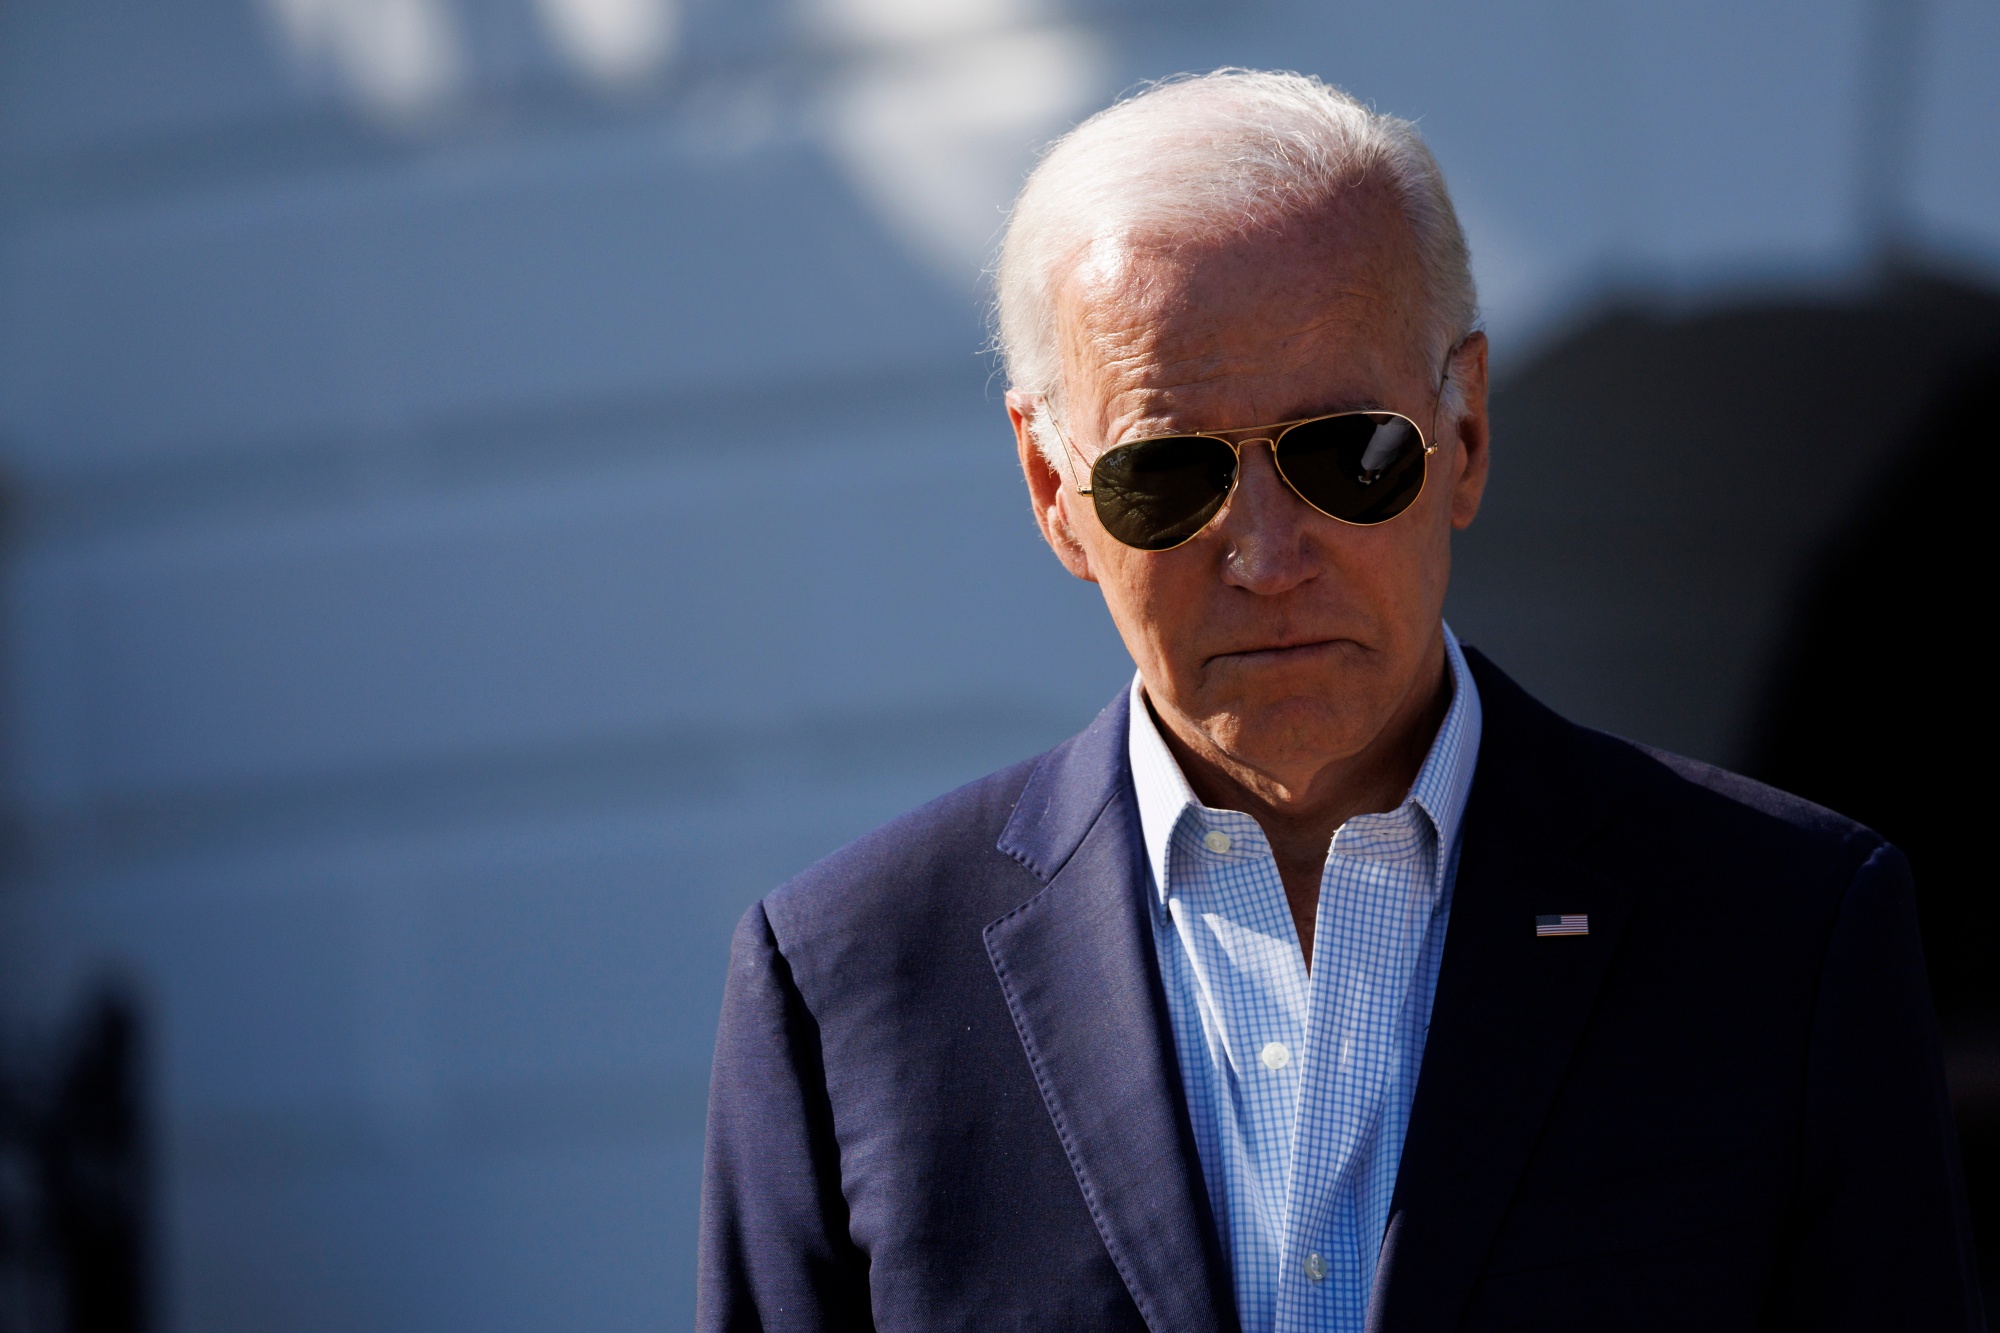 Biden Tax Plan: Wealthy Business Owners at Center of Lobbying Fight on ...